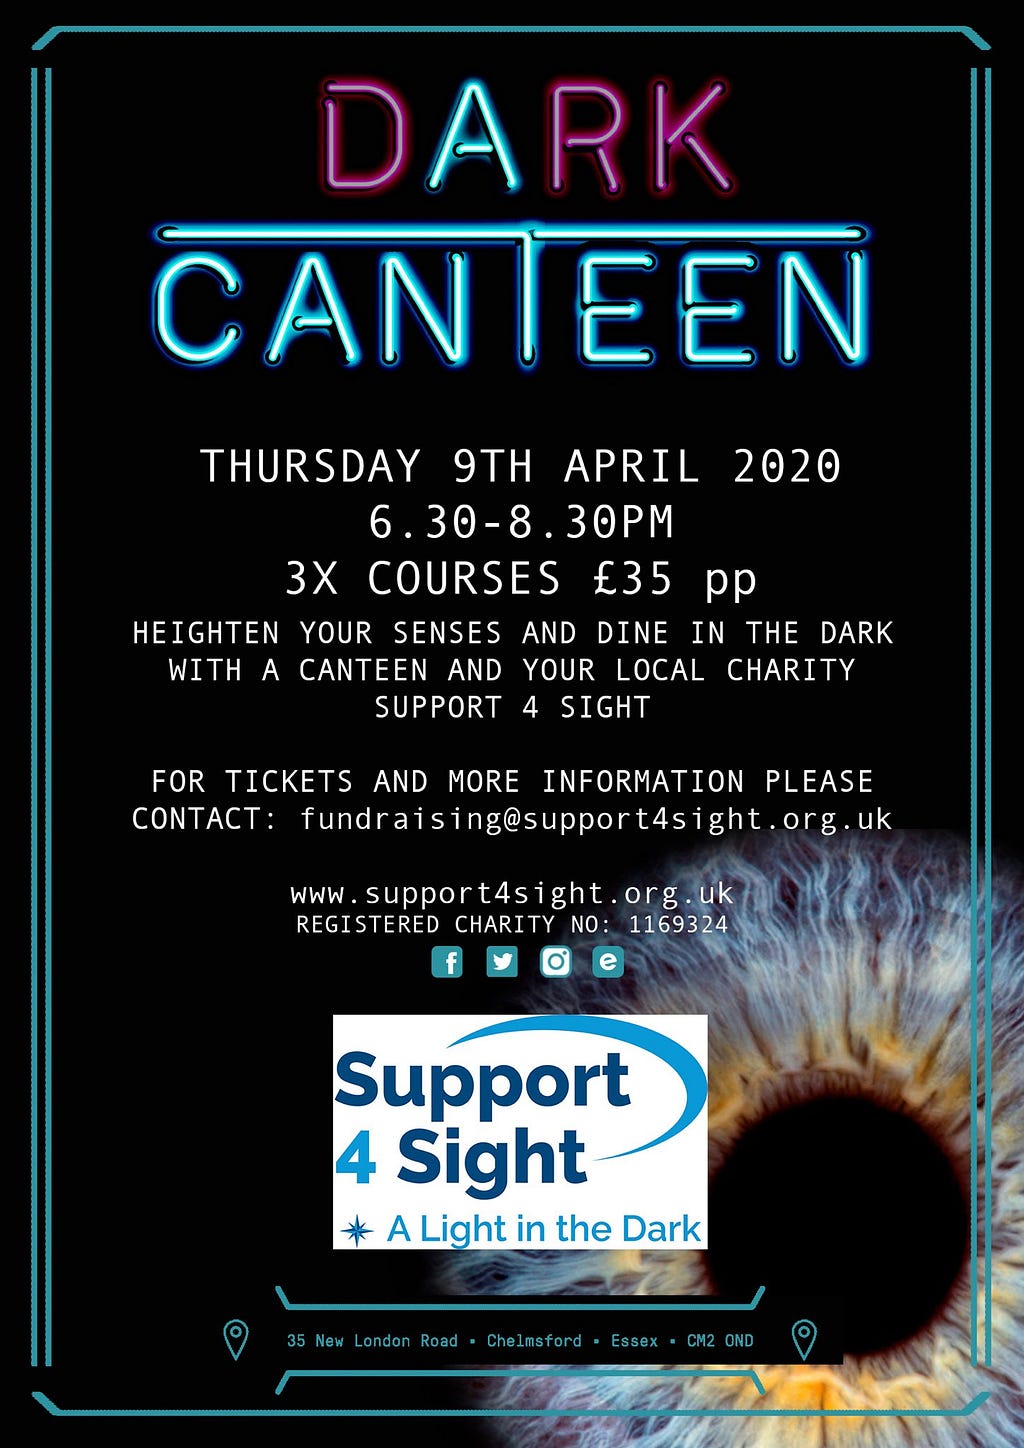 Dark Canteen poster, an immersive experience of eating in the dark to raise funds for sight loss charity Support4Sight.